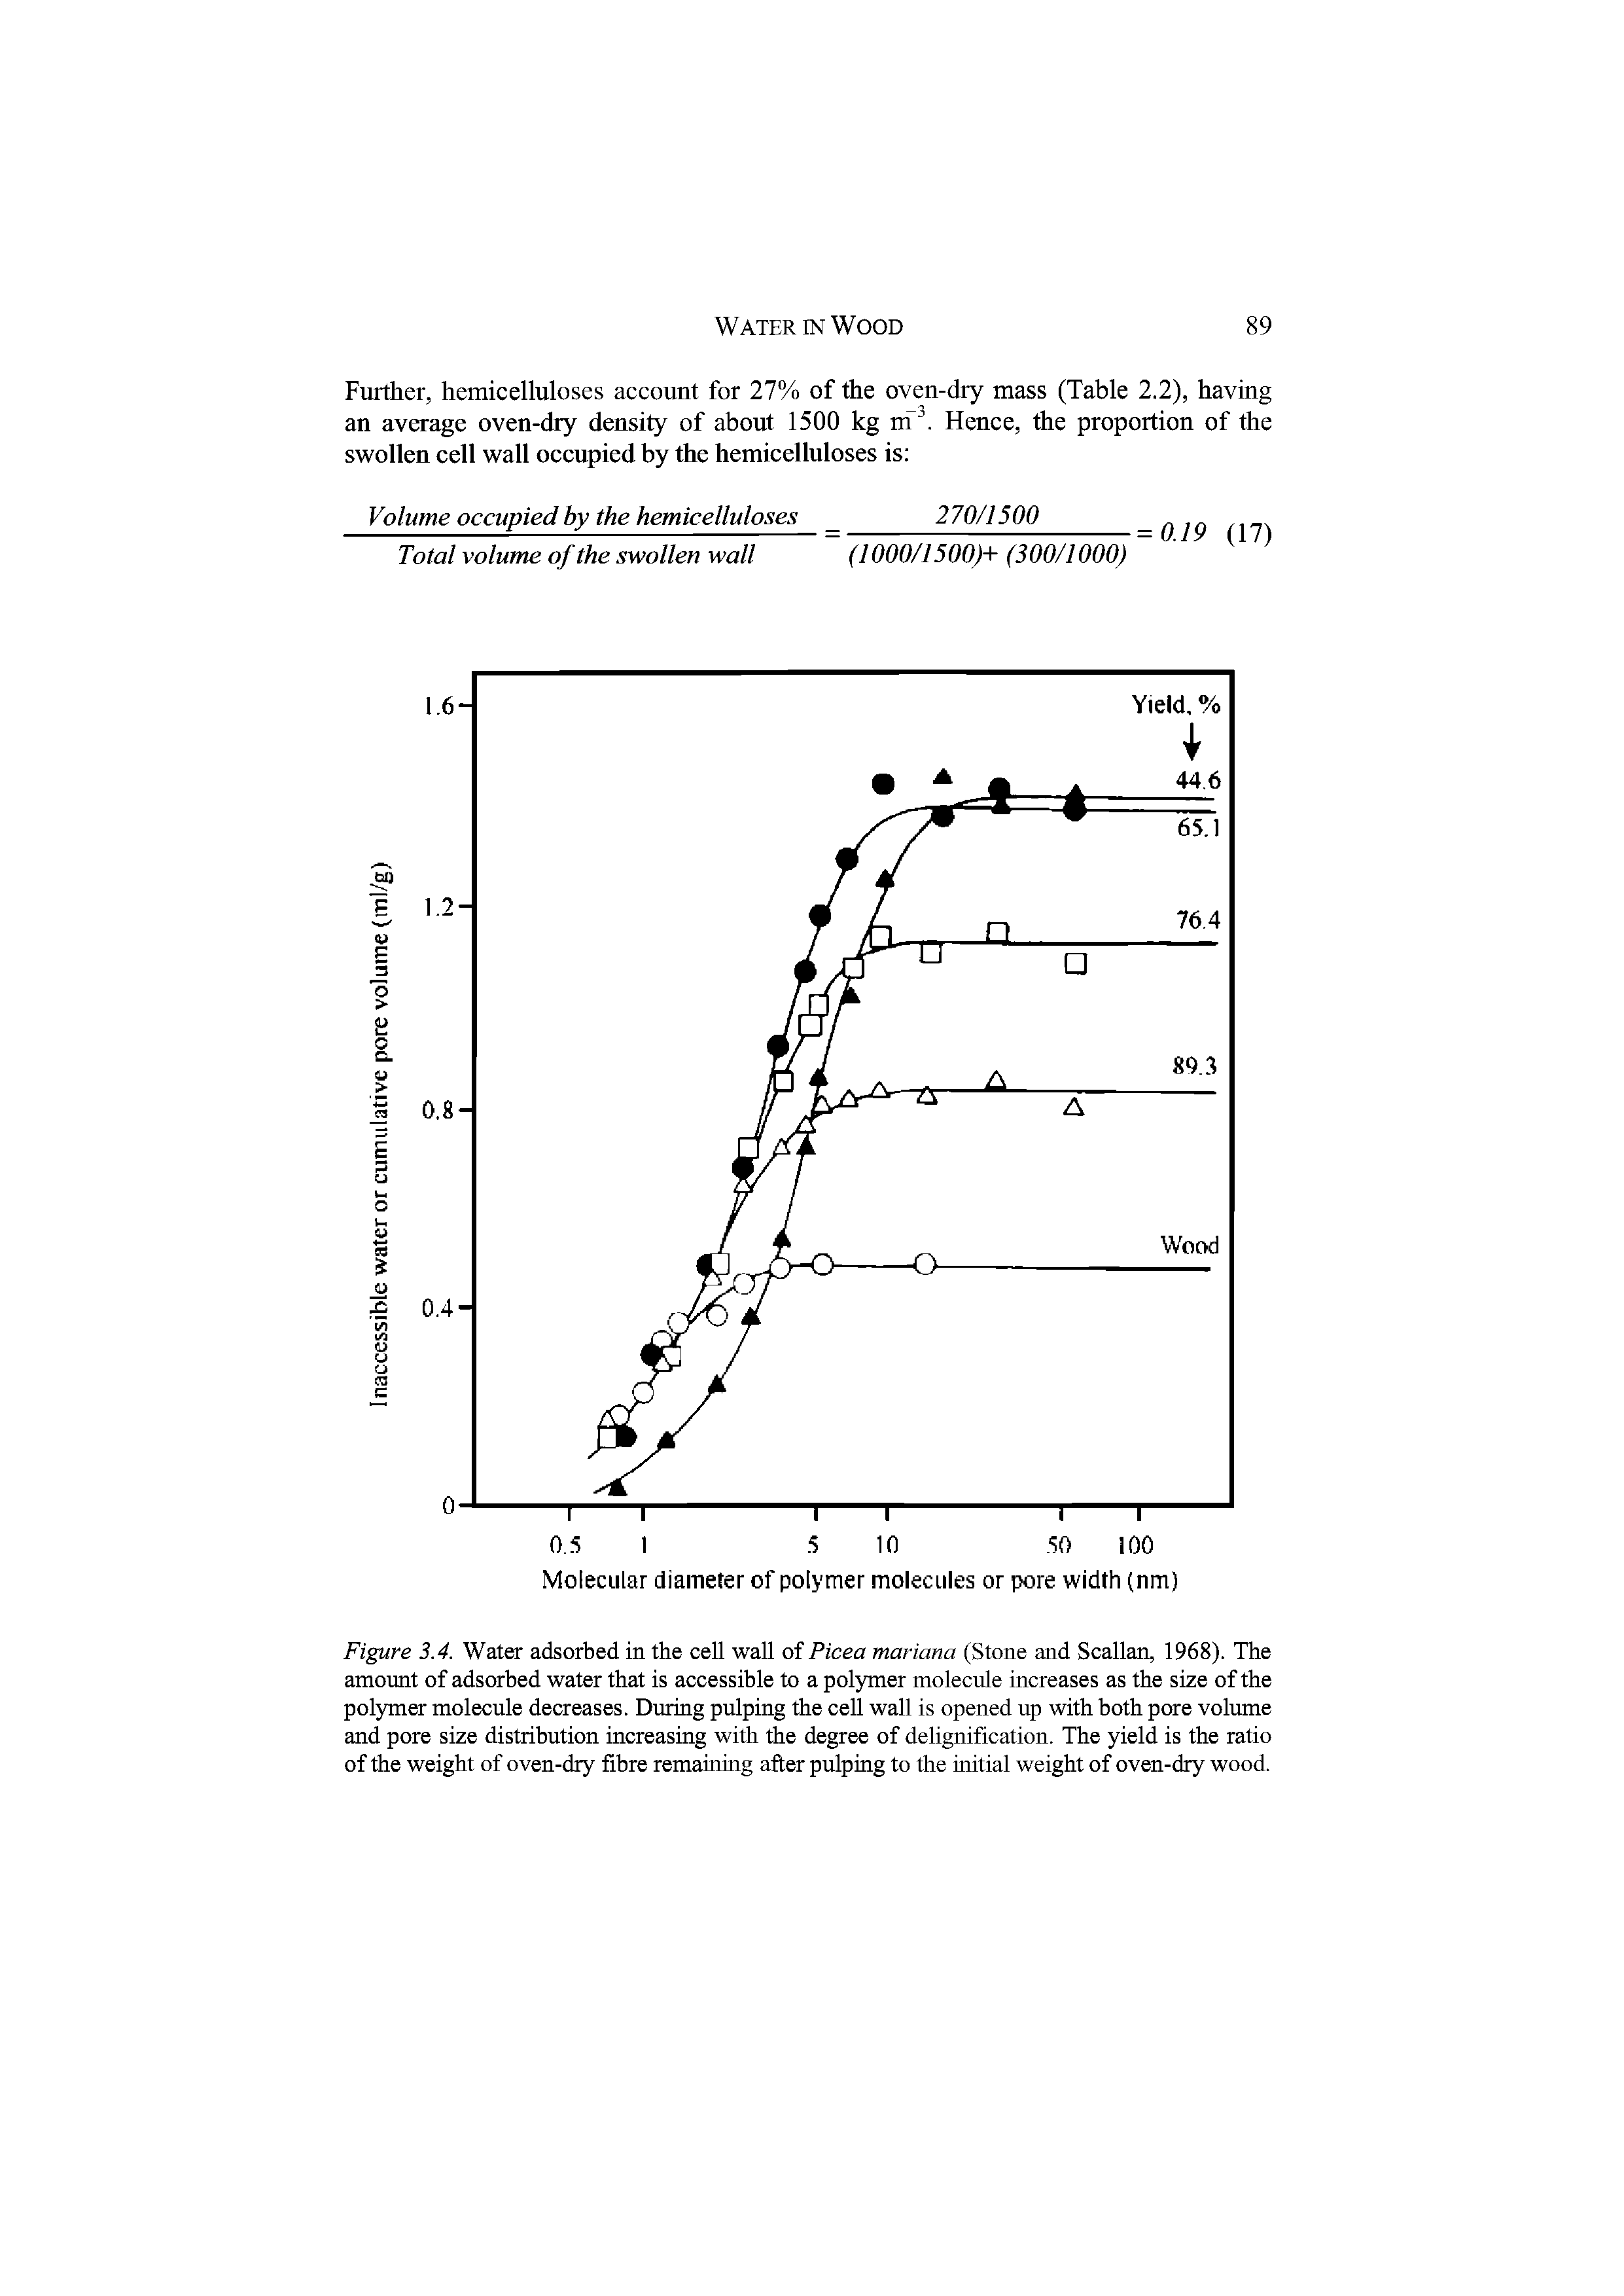 Figure 3.4. Water adsorbed in the cell wall of Picea mariana (Stone and Scallan, 1968). The amount of adsorbed water that is accessible to a polymer molecule increases as the size of the polymer molecule decreases. During pulping the cell wall is opened up with both pore volume and pore size distribution increasing with the degree of delignification. The yield is the ratio of the weight of oven-dry fibre remaining after pulping to the initial weight of oven-dry wood.